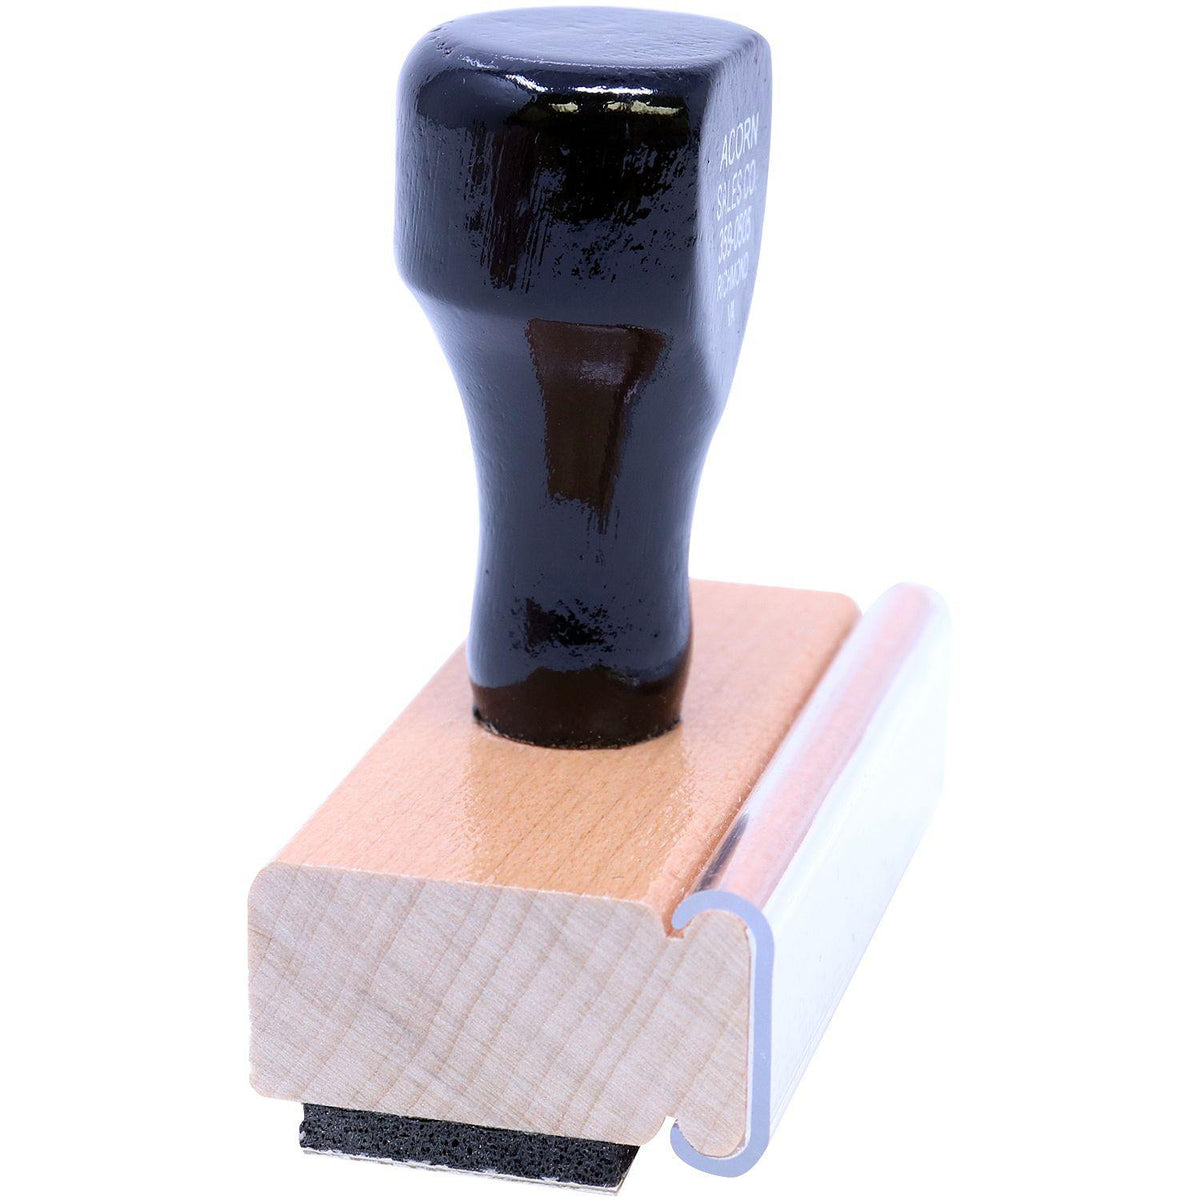 Large Terrific Effort Rubber Stamp - Engineer Seal Stamps - Brand_Acorn, Impression Size_Large, Stamp Type_Regular Stamp, Type of Use_General, Type of Use_Teacher